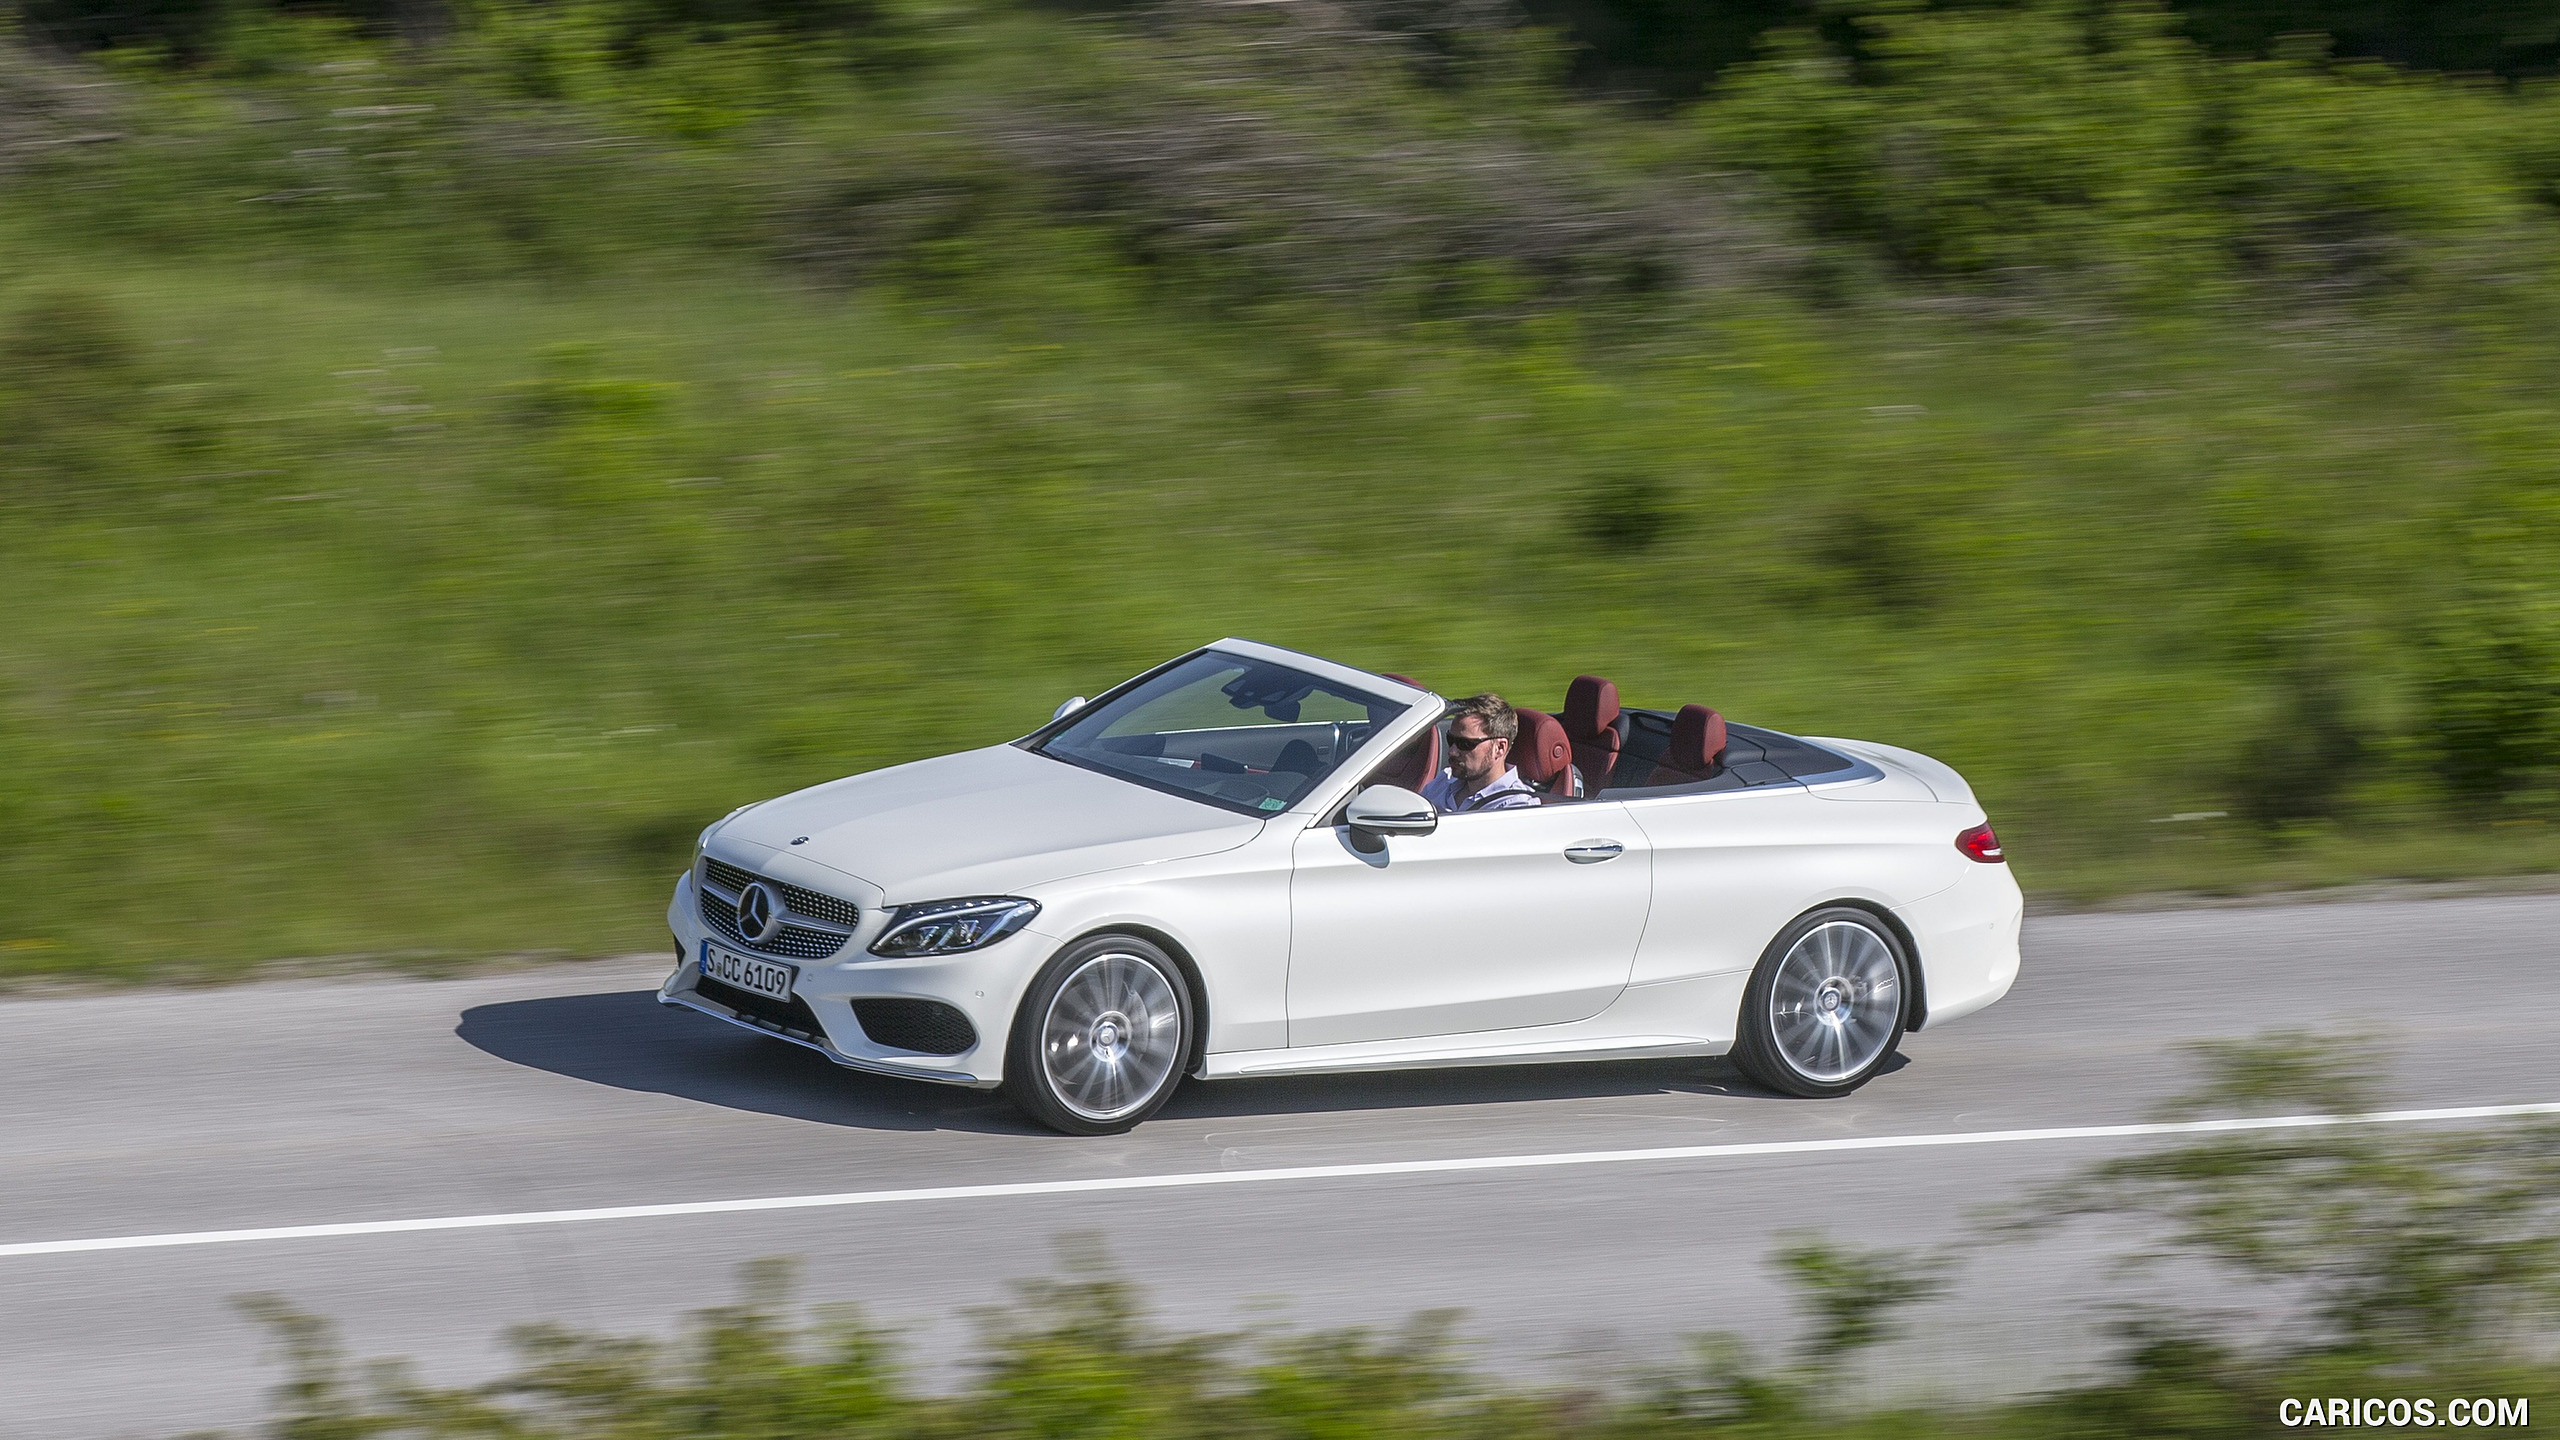 2017 Mercedes-Benz C-Class C300 Cabriolet - Side, #44 of 96